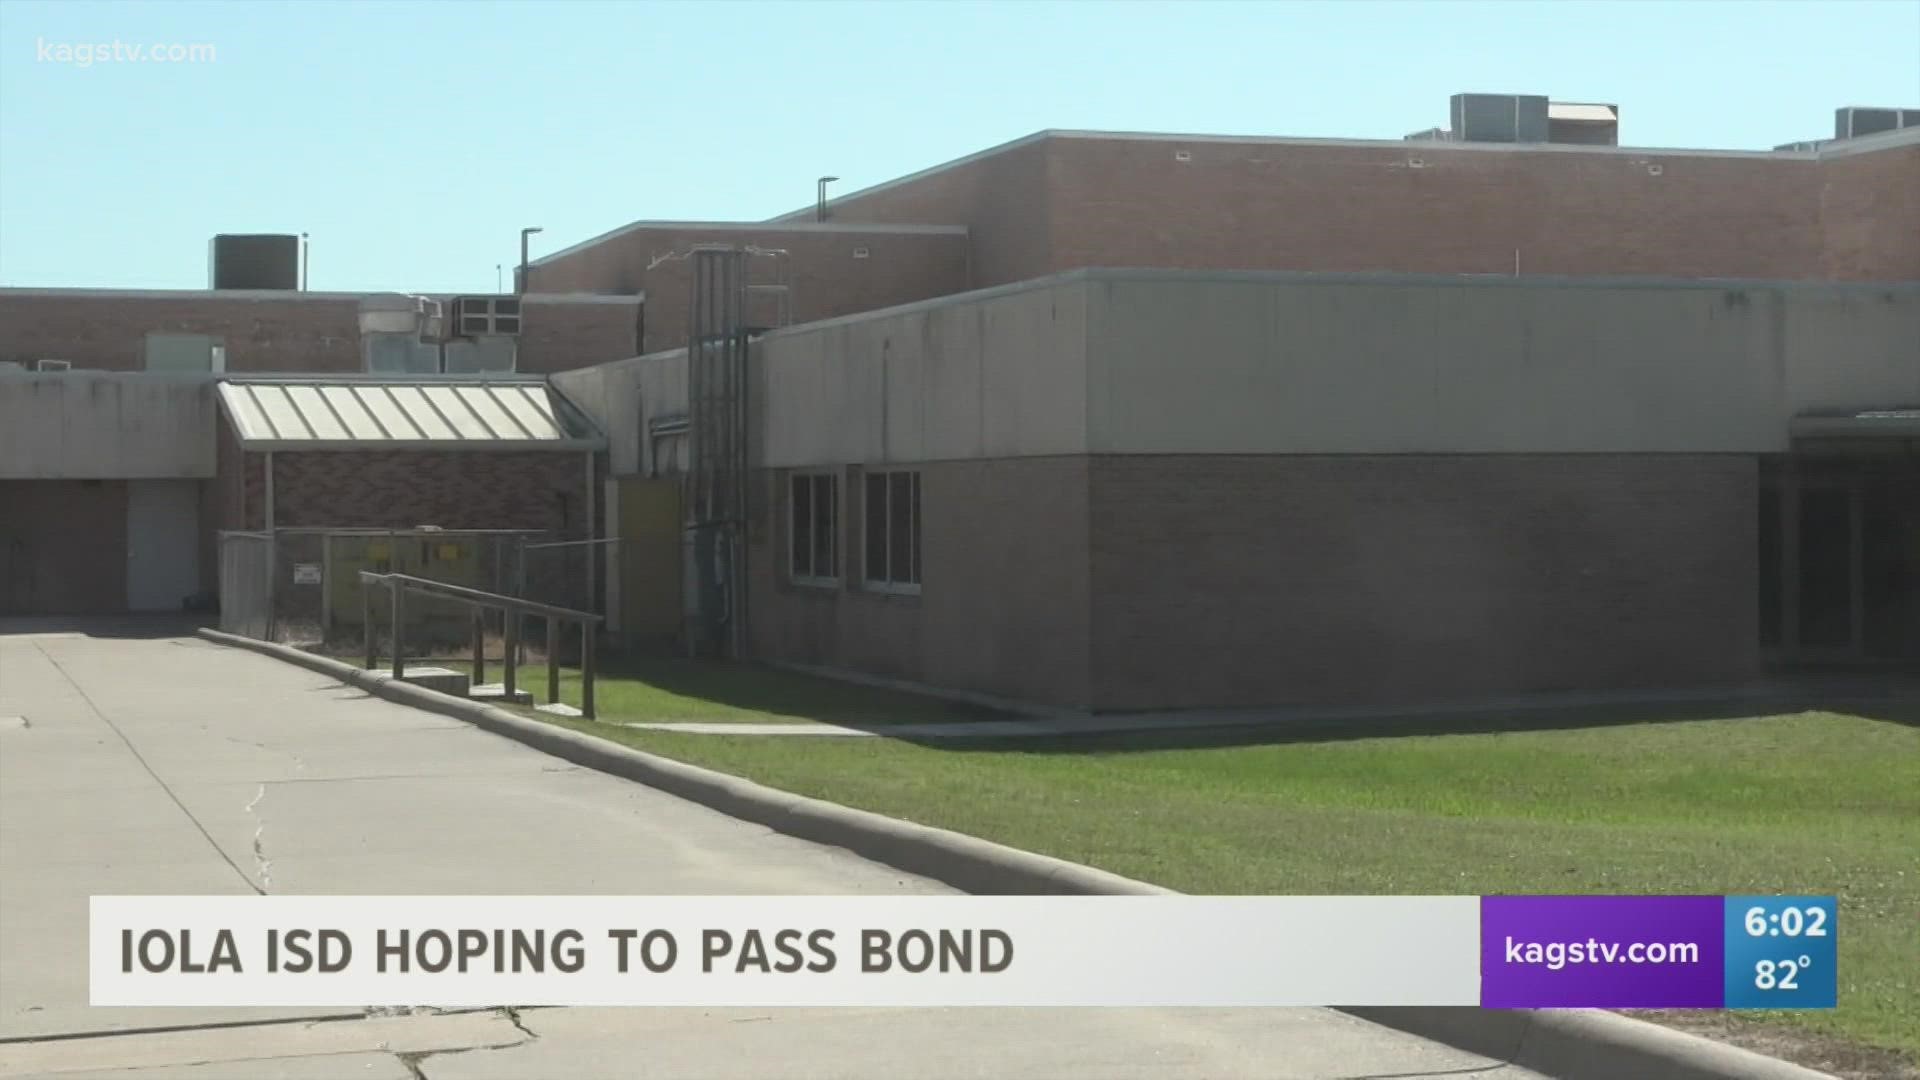 The money will be used to improve Iola ISD campuses through extensive improvements.